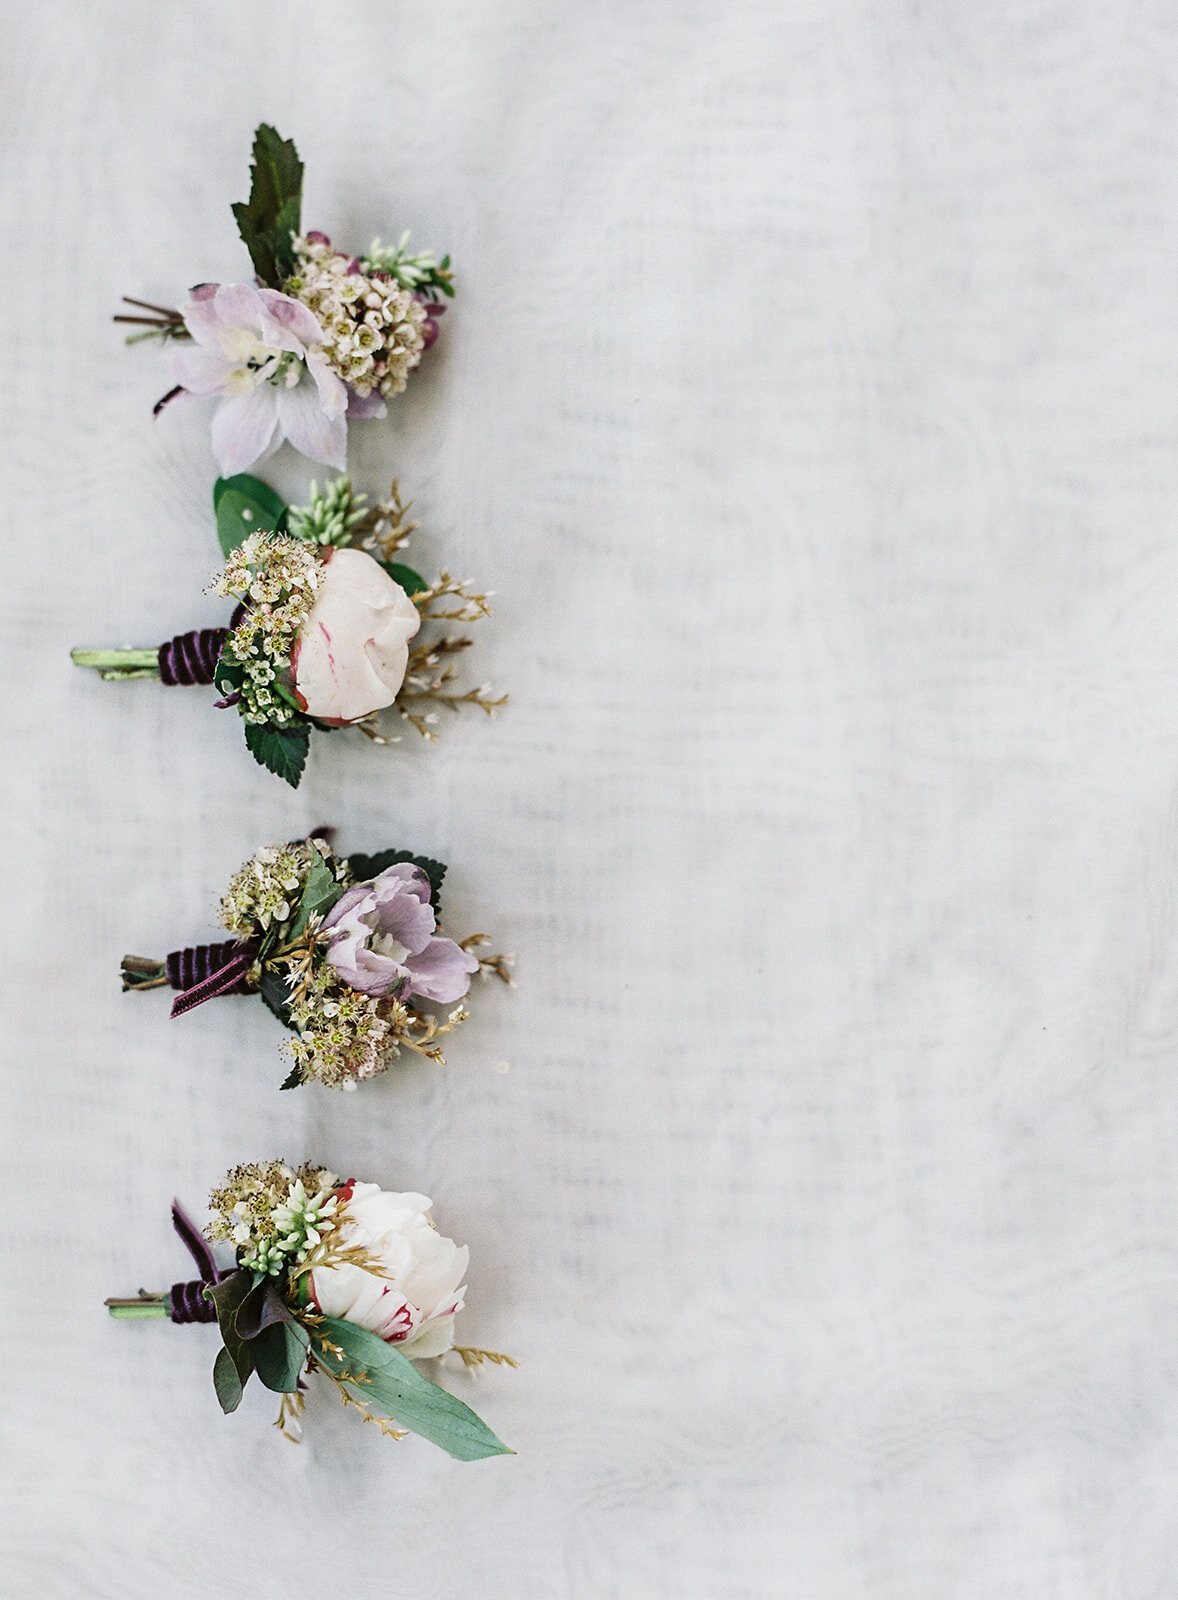 Four boutonnieres on the left side of frame spaced about an inch apart going from top to bottom. All in shade of purples and pinks. Photographed by wedding photographers in Charleston Amy Mulder Photography.